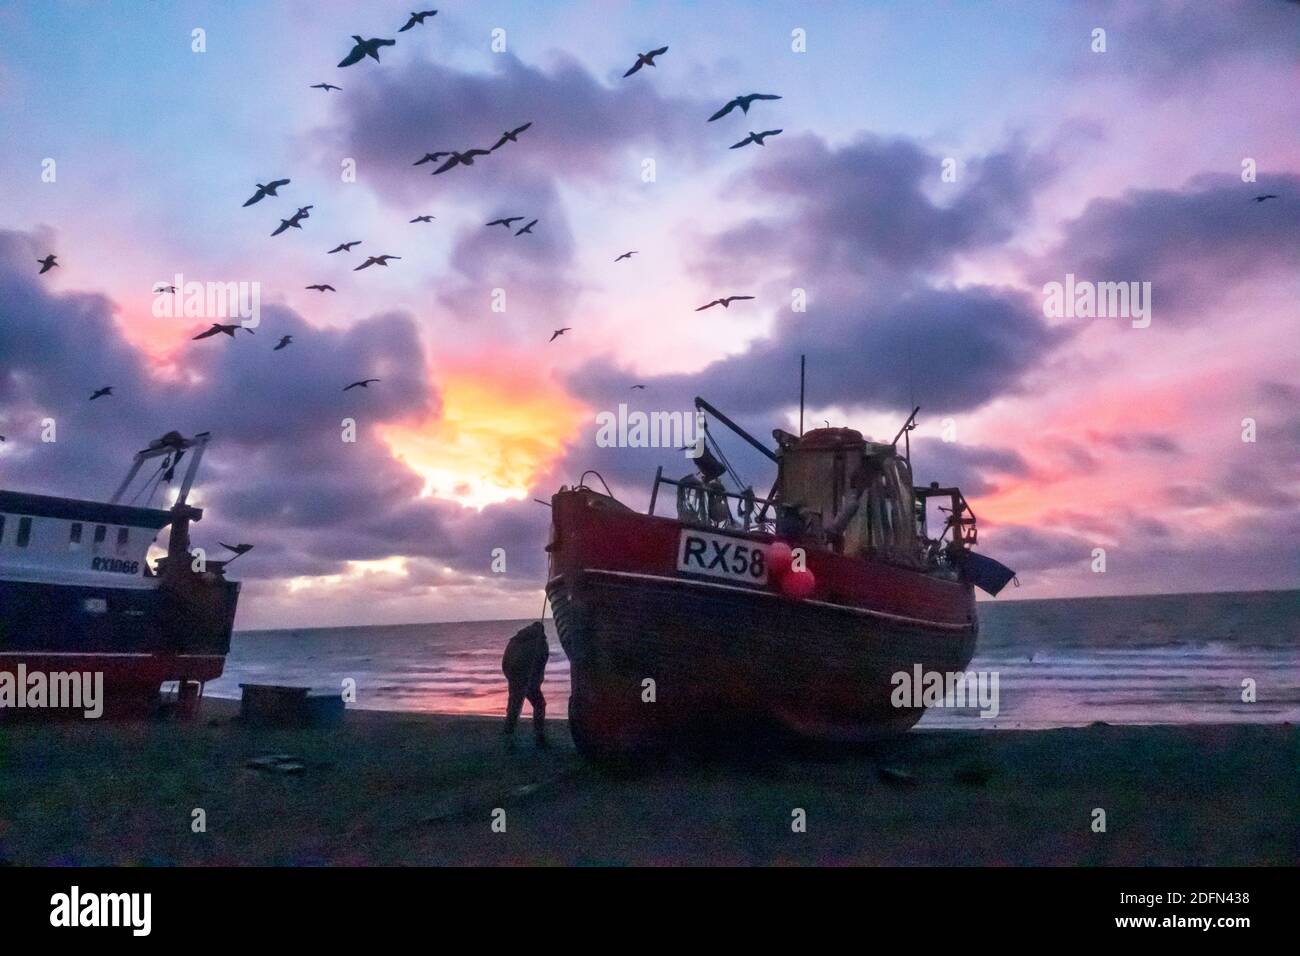 Hastings, East Sussex. 5th December 2020. Seagulls swirl at dawn over Hastings fishing boats, with a colourful sunrise over the English Channel, on the day of Boris Johnson's talks with EU President of the European Commission, Ursula von der Leyen, to try to break the deadlock over Brexit fishing rights in British waters and secure a last minute trade deal. UK, EU. Winter sunrise UK Stock Photo